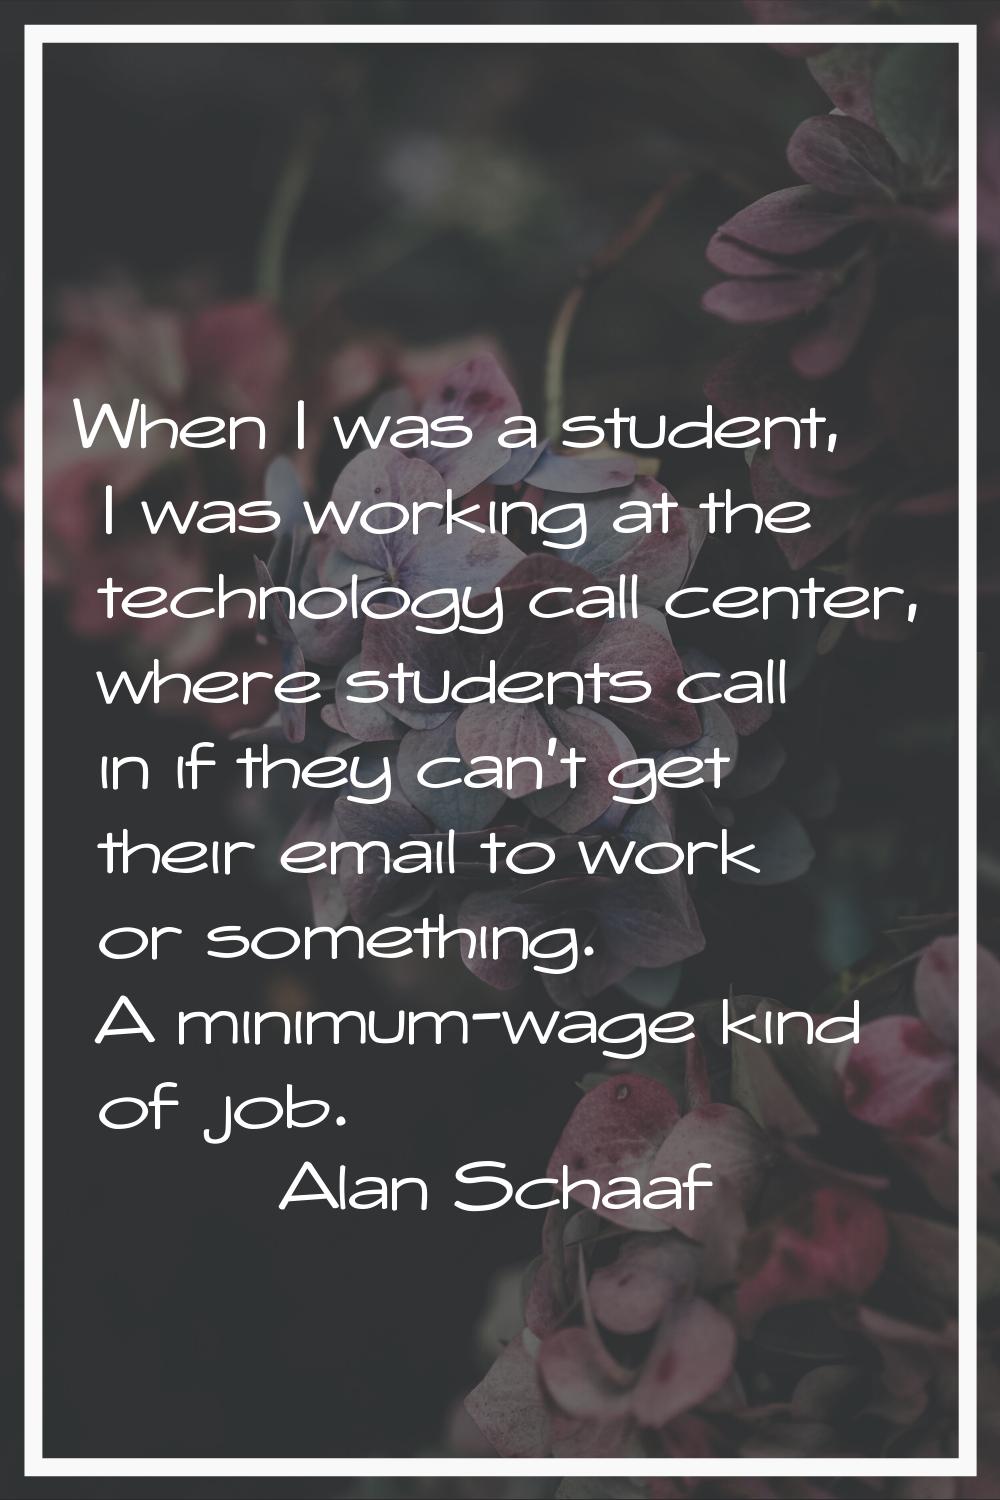 When I was a student, I was working at the technology call center, where students call in if they c